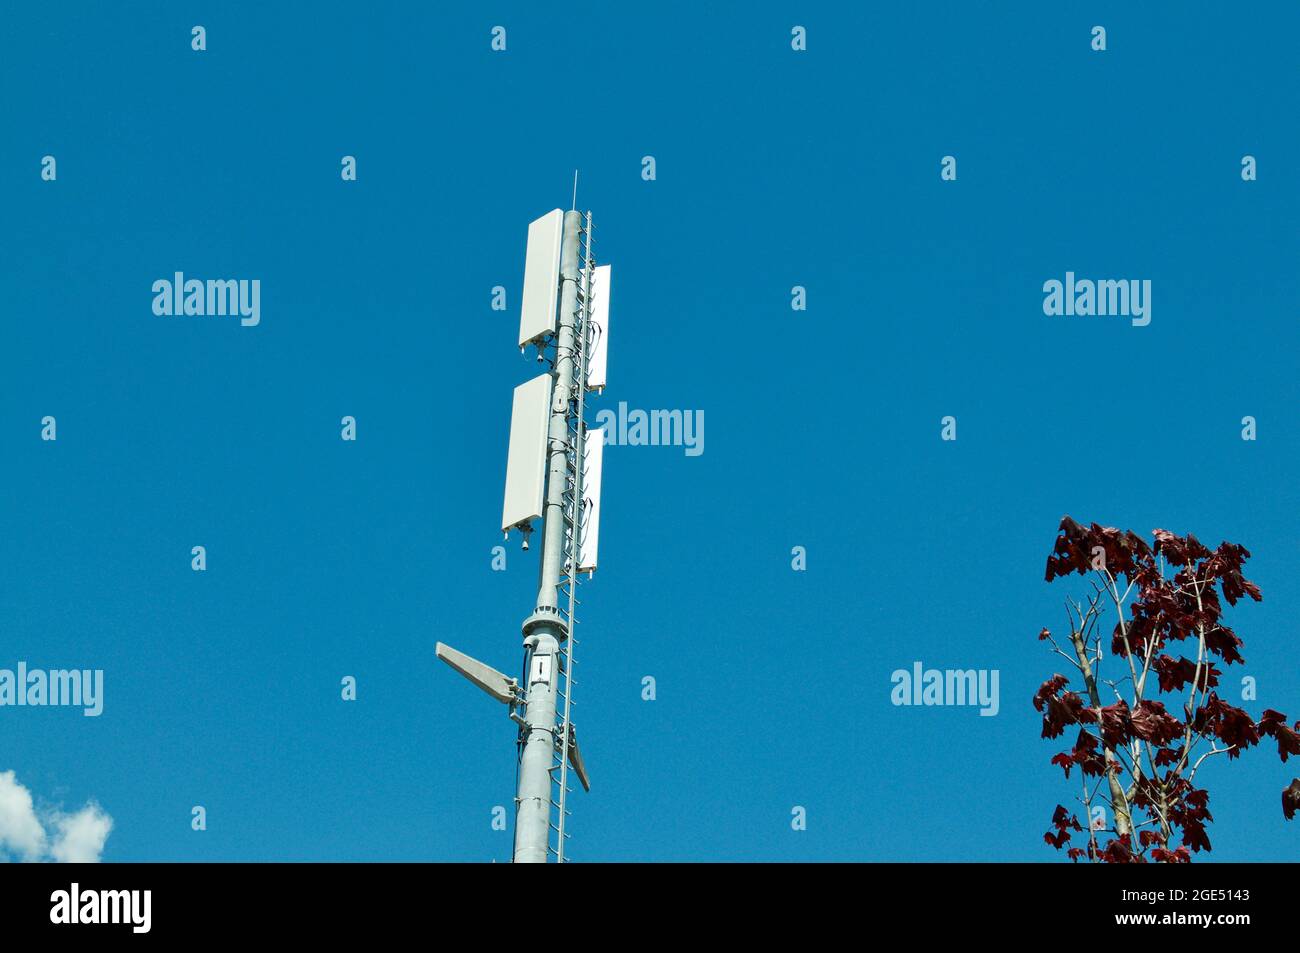 View of a Telecommunication tower antenna of 4G and 5G mobile communication system located on a building in Bellinzona, Switzerland Stock Photo